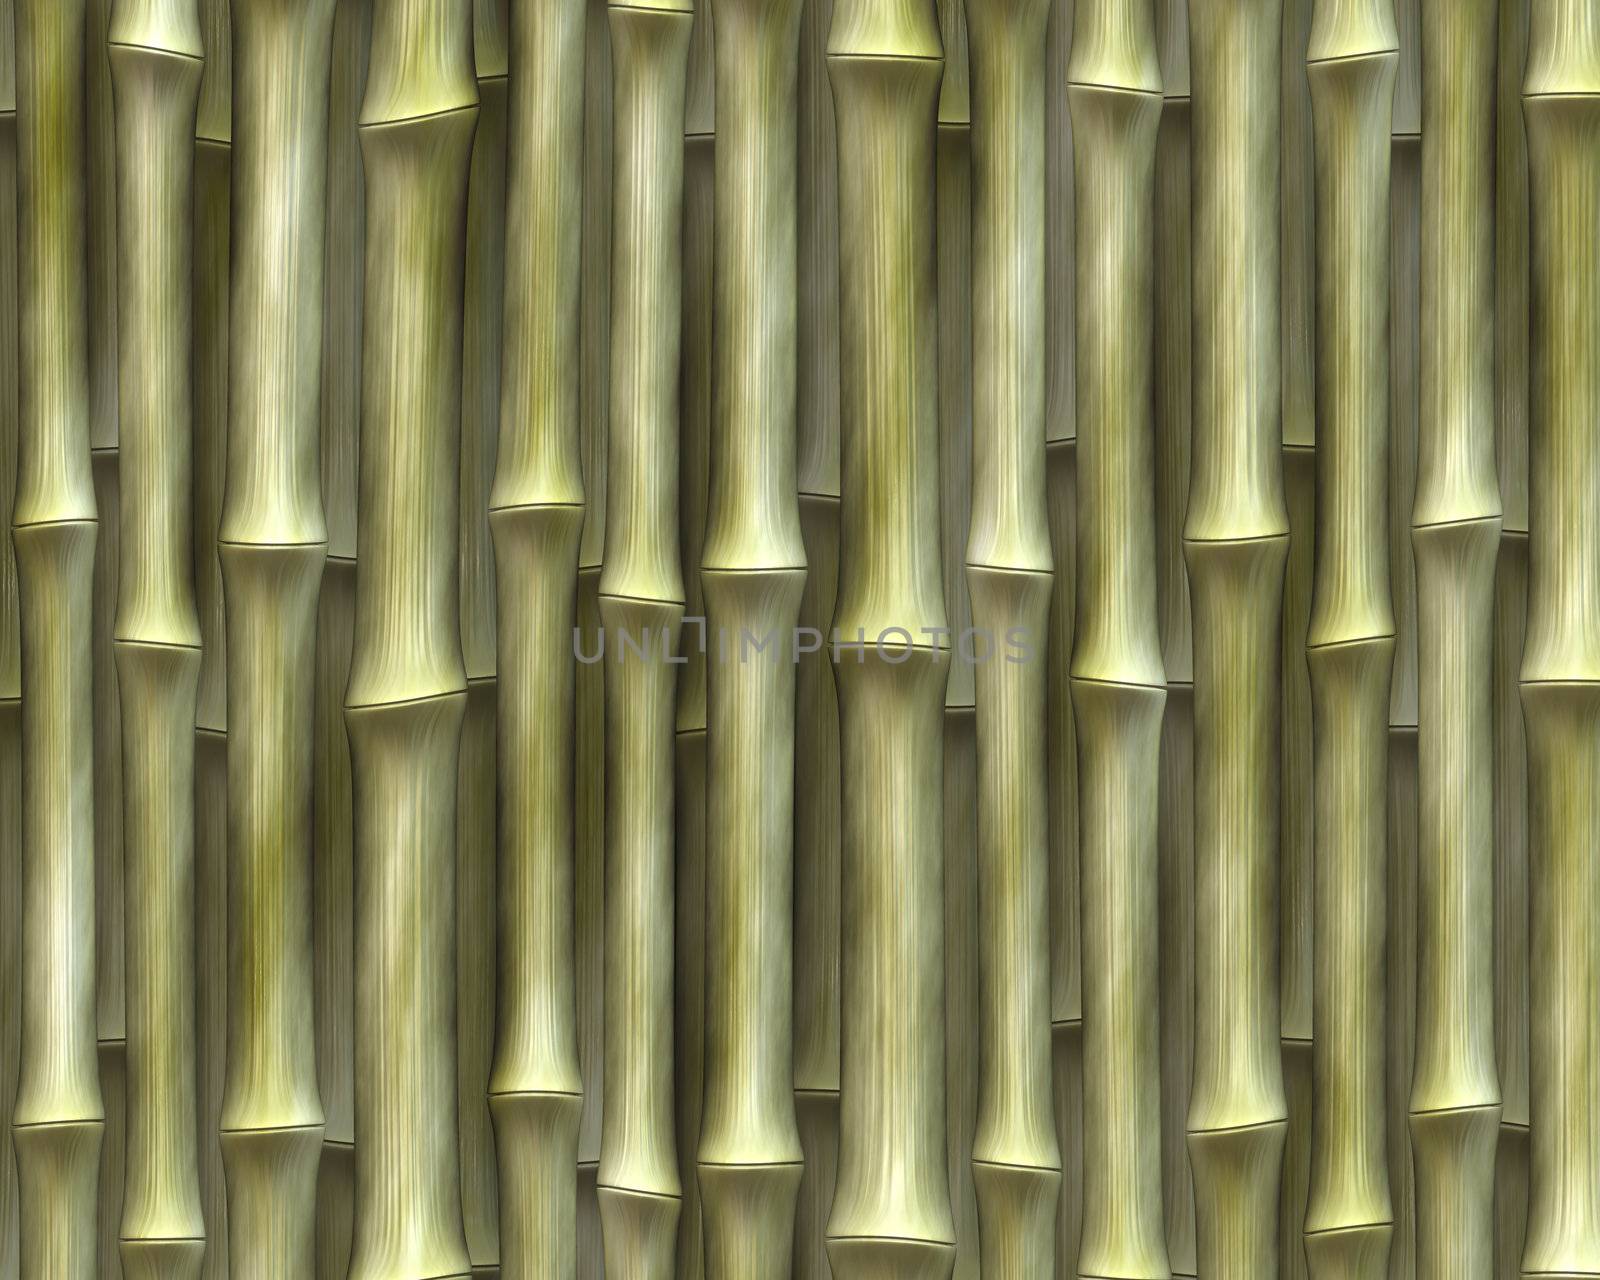 excellent big background with lots of bamboo